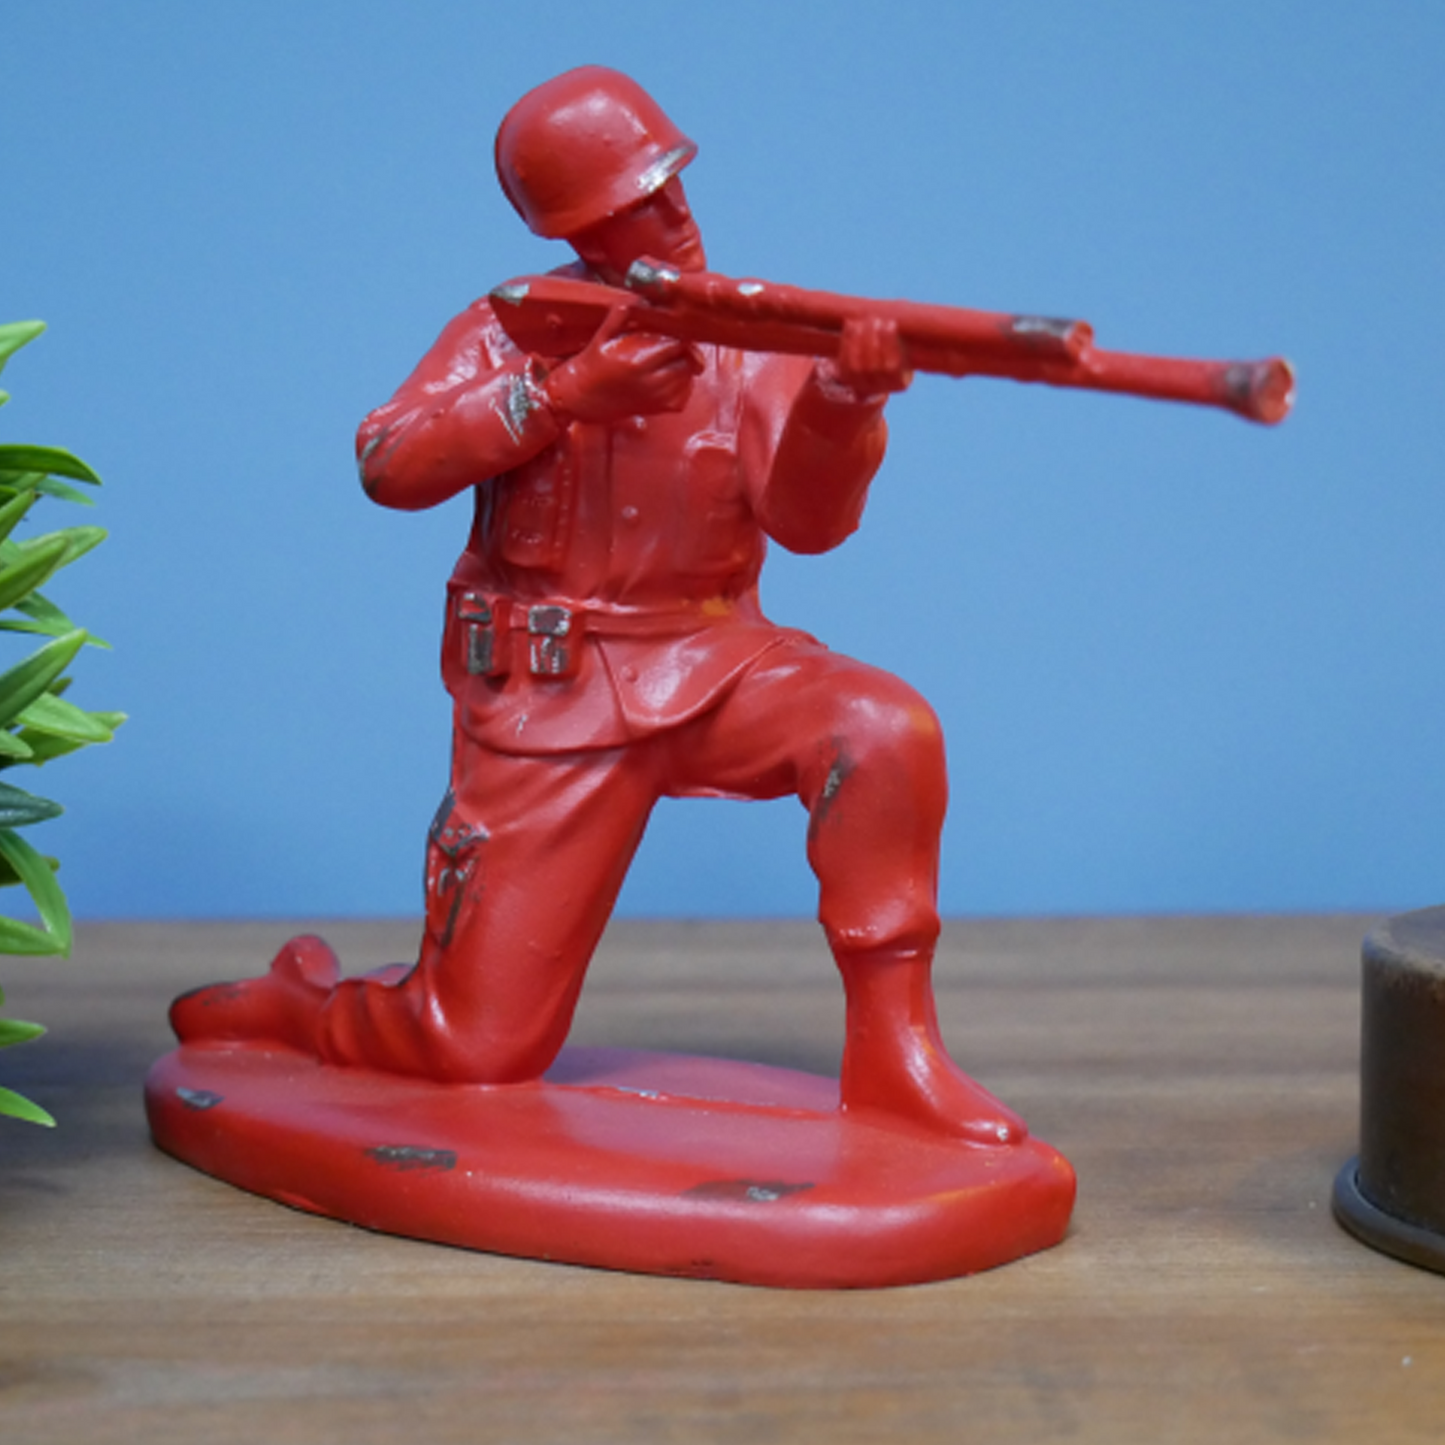 Crouching Red Army Man - 18cm Toy Soldier Ornament (Front) | Happy Piranha